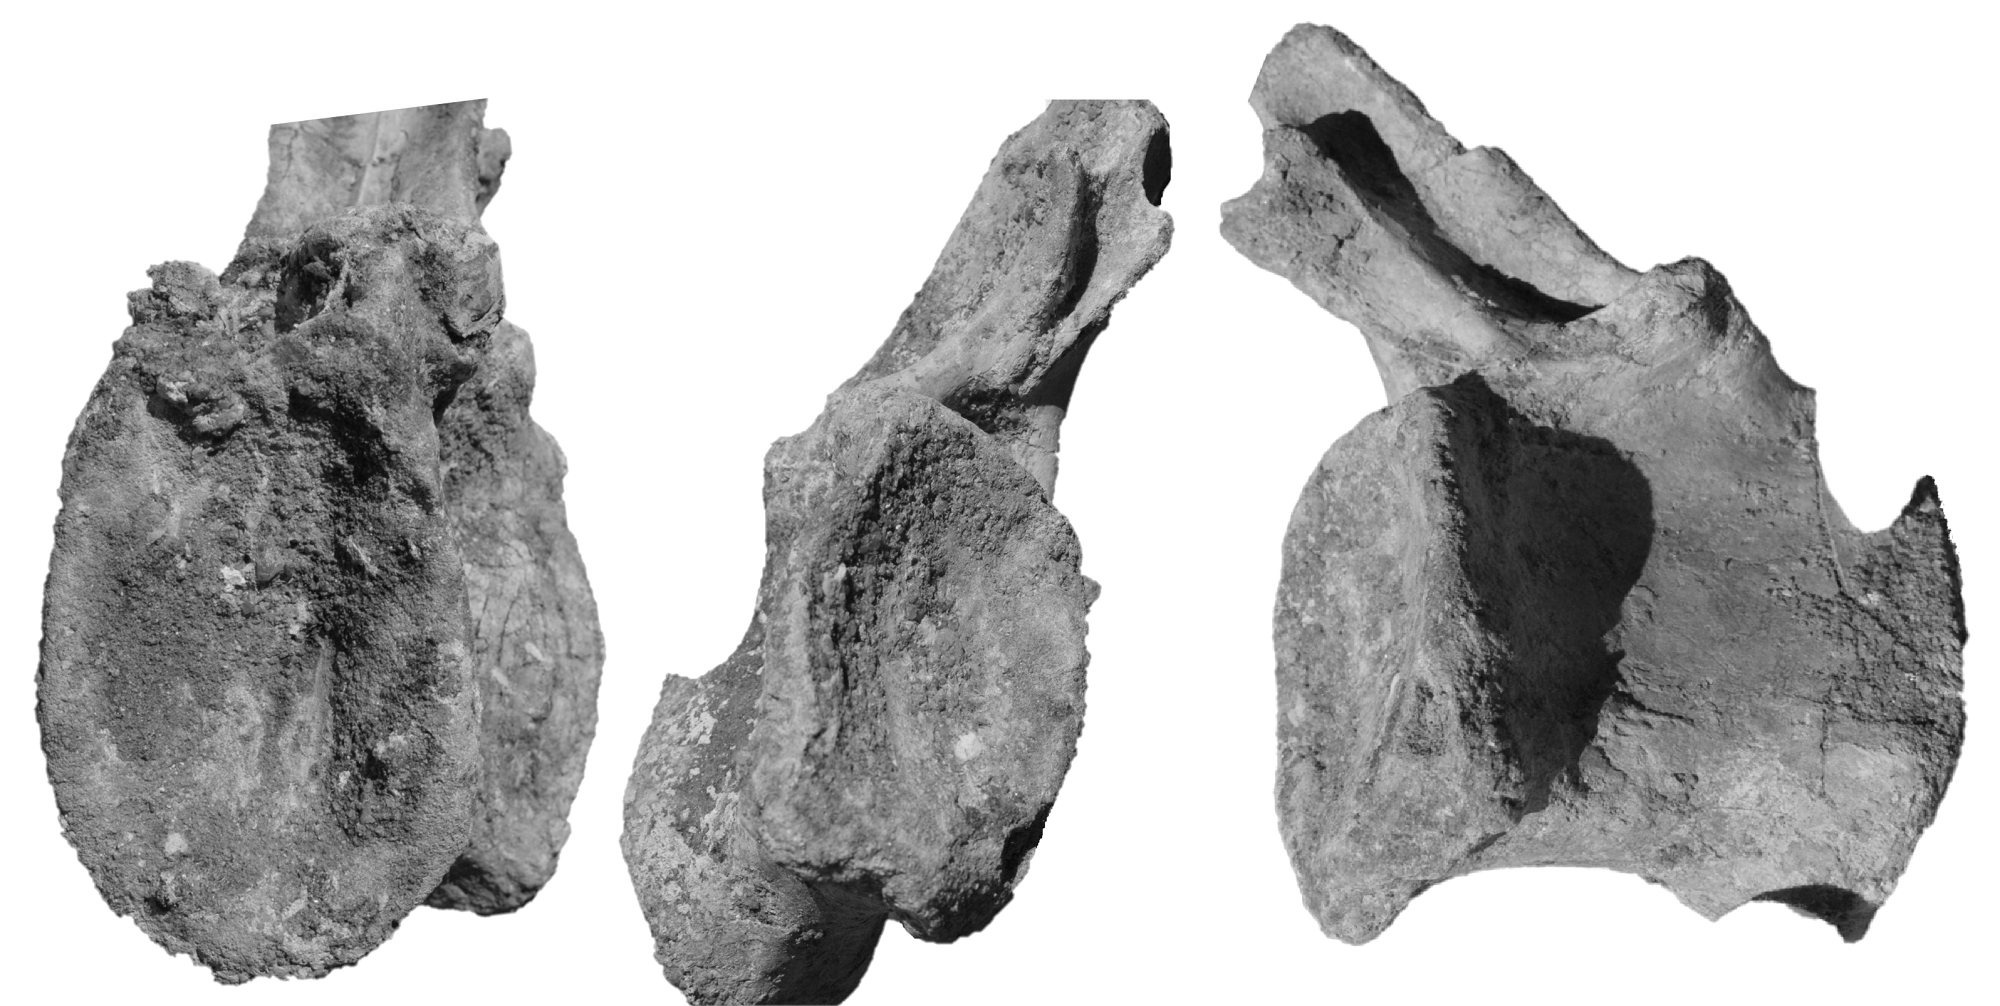 Mid caudal vertebra (R393243465120-2104) of Spinosaurid tentatively refer as Spinosaurus dorsojuvencus. From left image: anterior view (front view); Middle image: posterior view (backside view); Right image: in right lateral view (side view). Middle and right image provide a roughly idea of how the posterior view look like